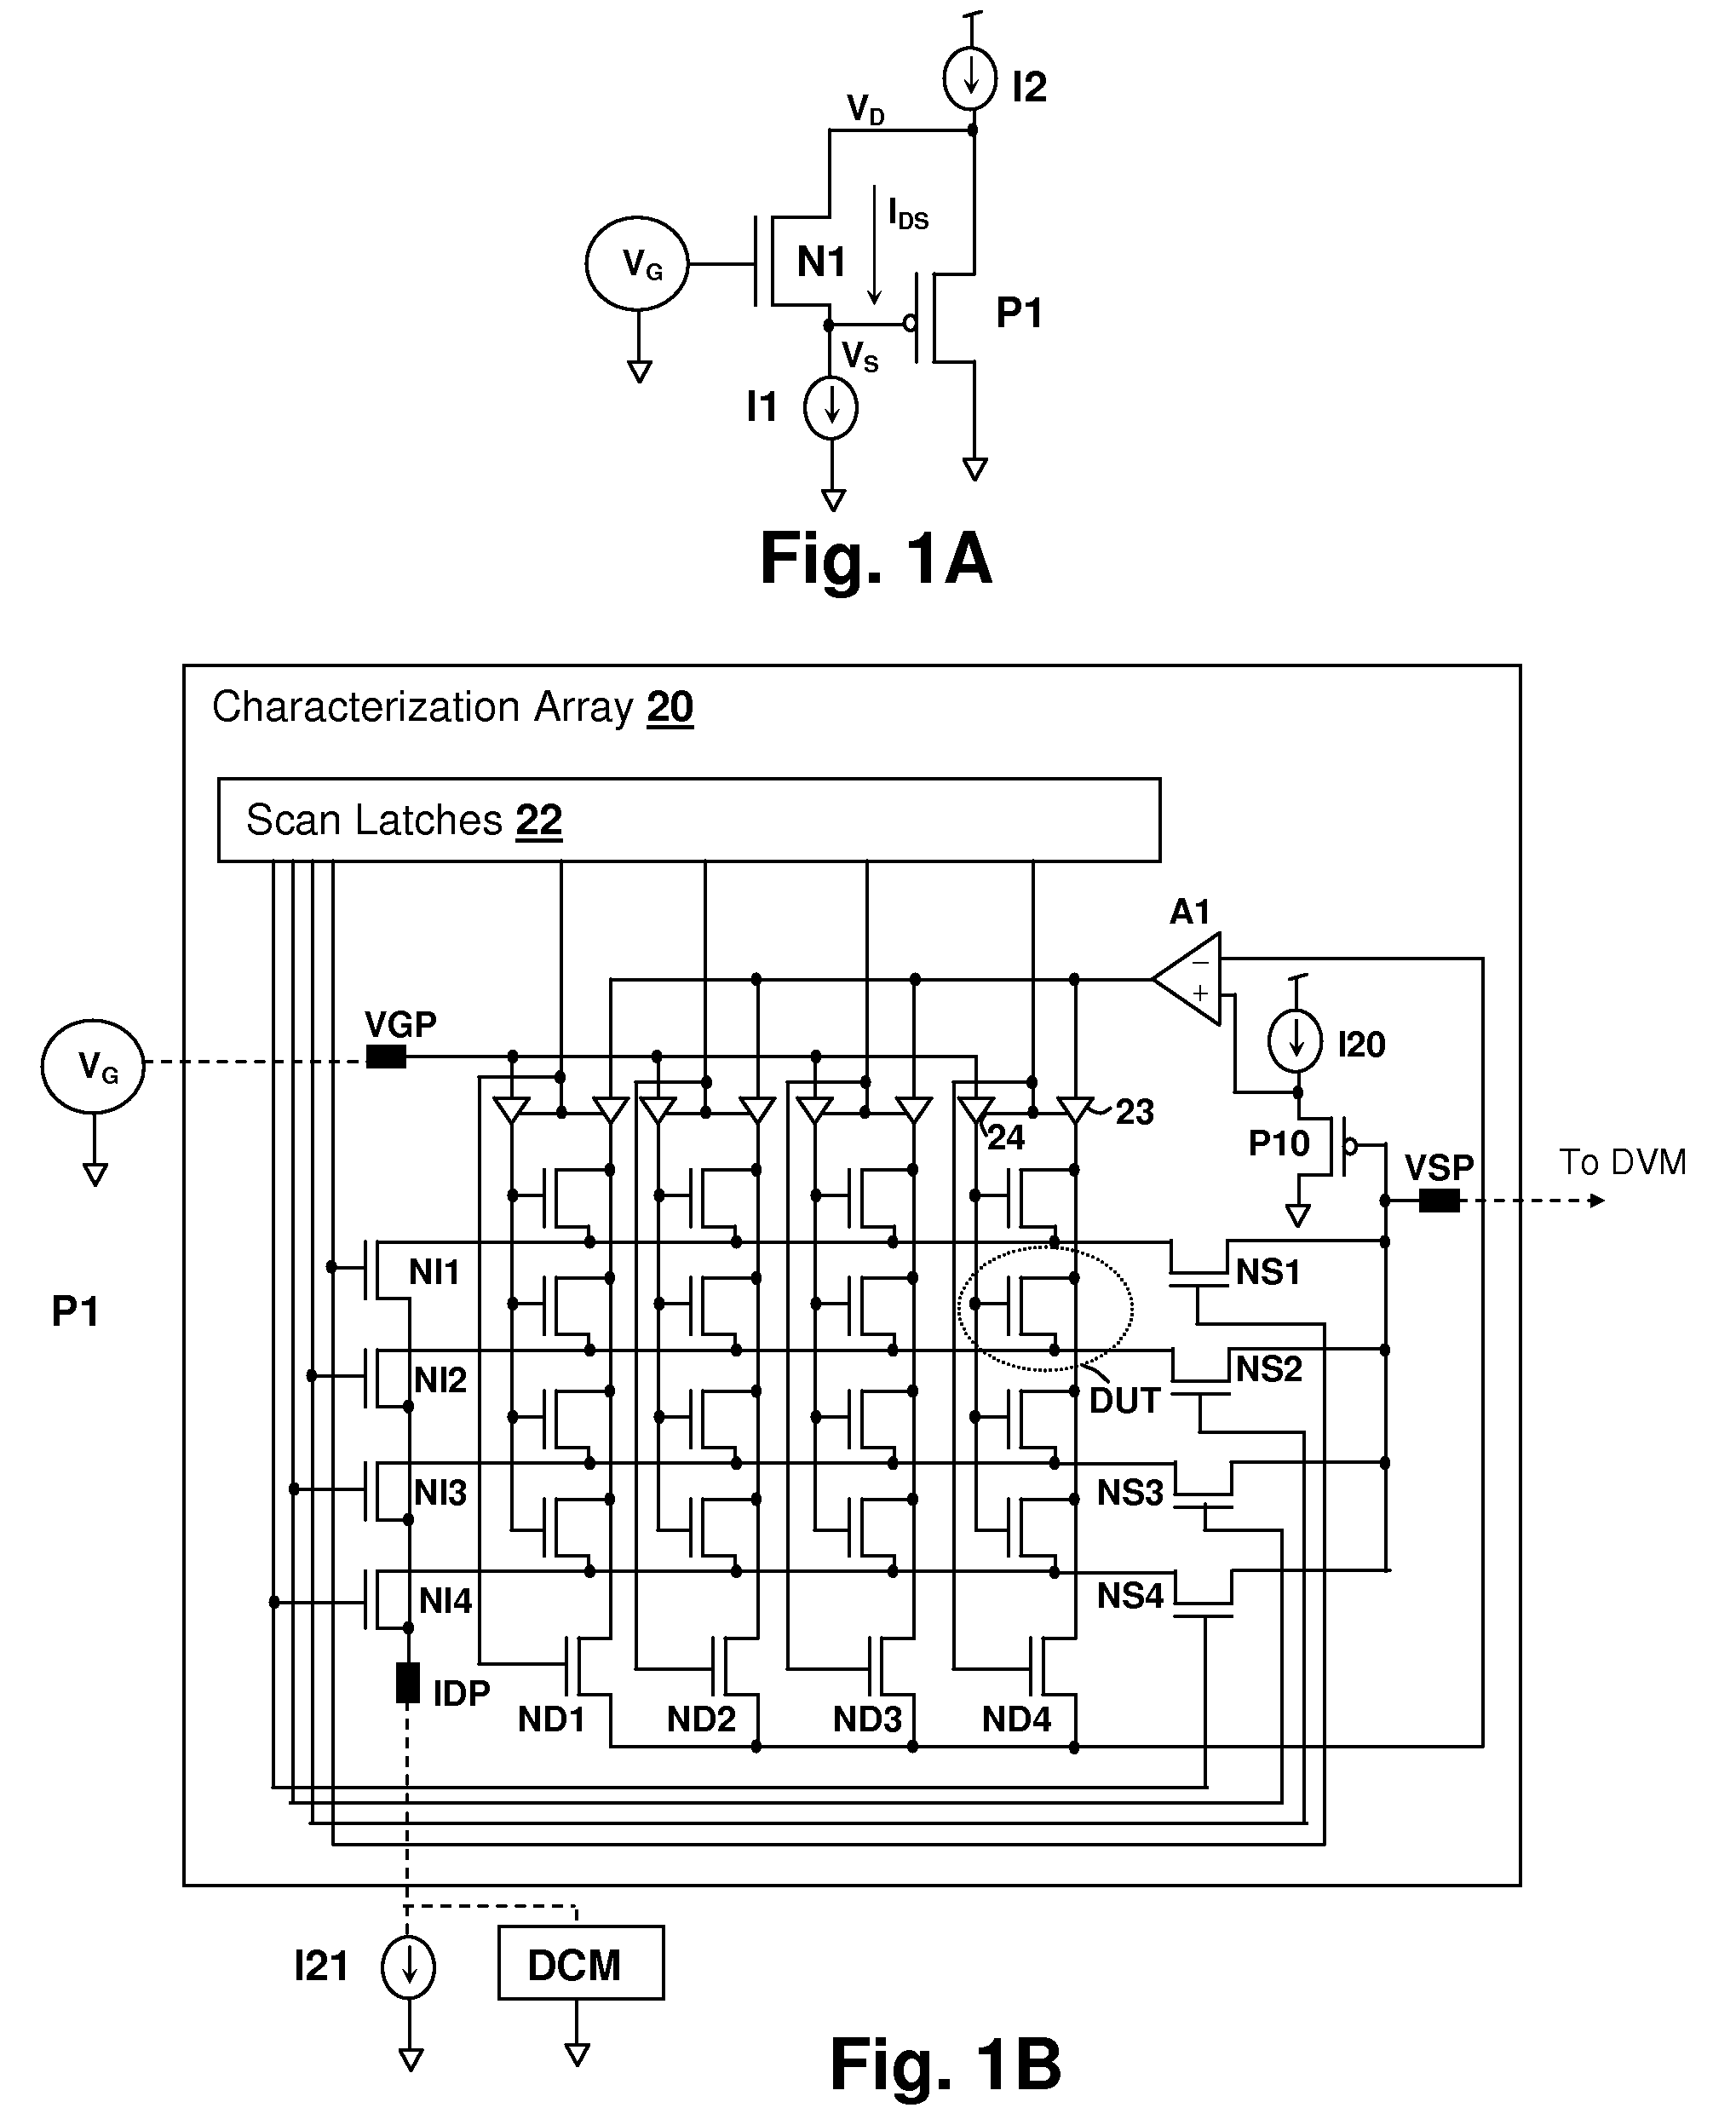 Characterization circuit for fast determination of device capacitance variation